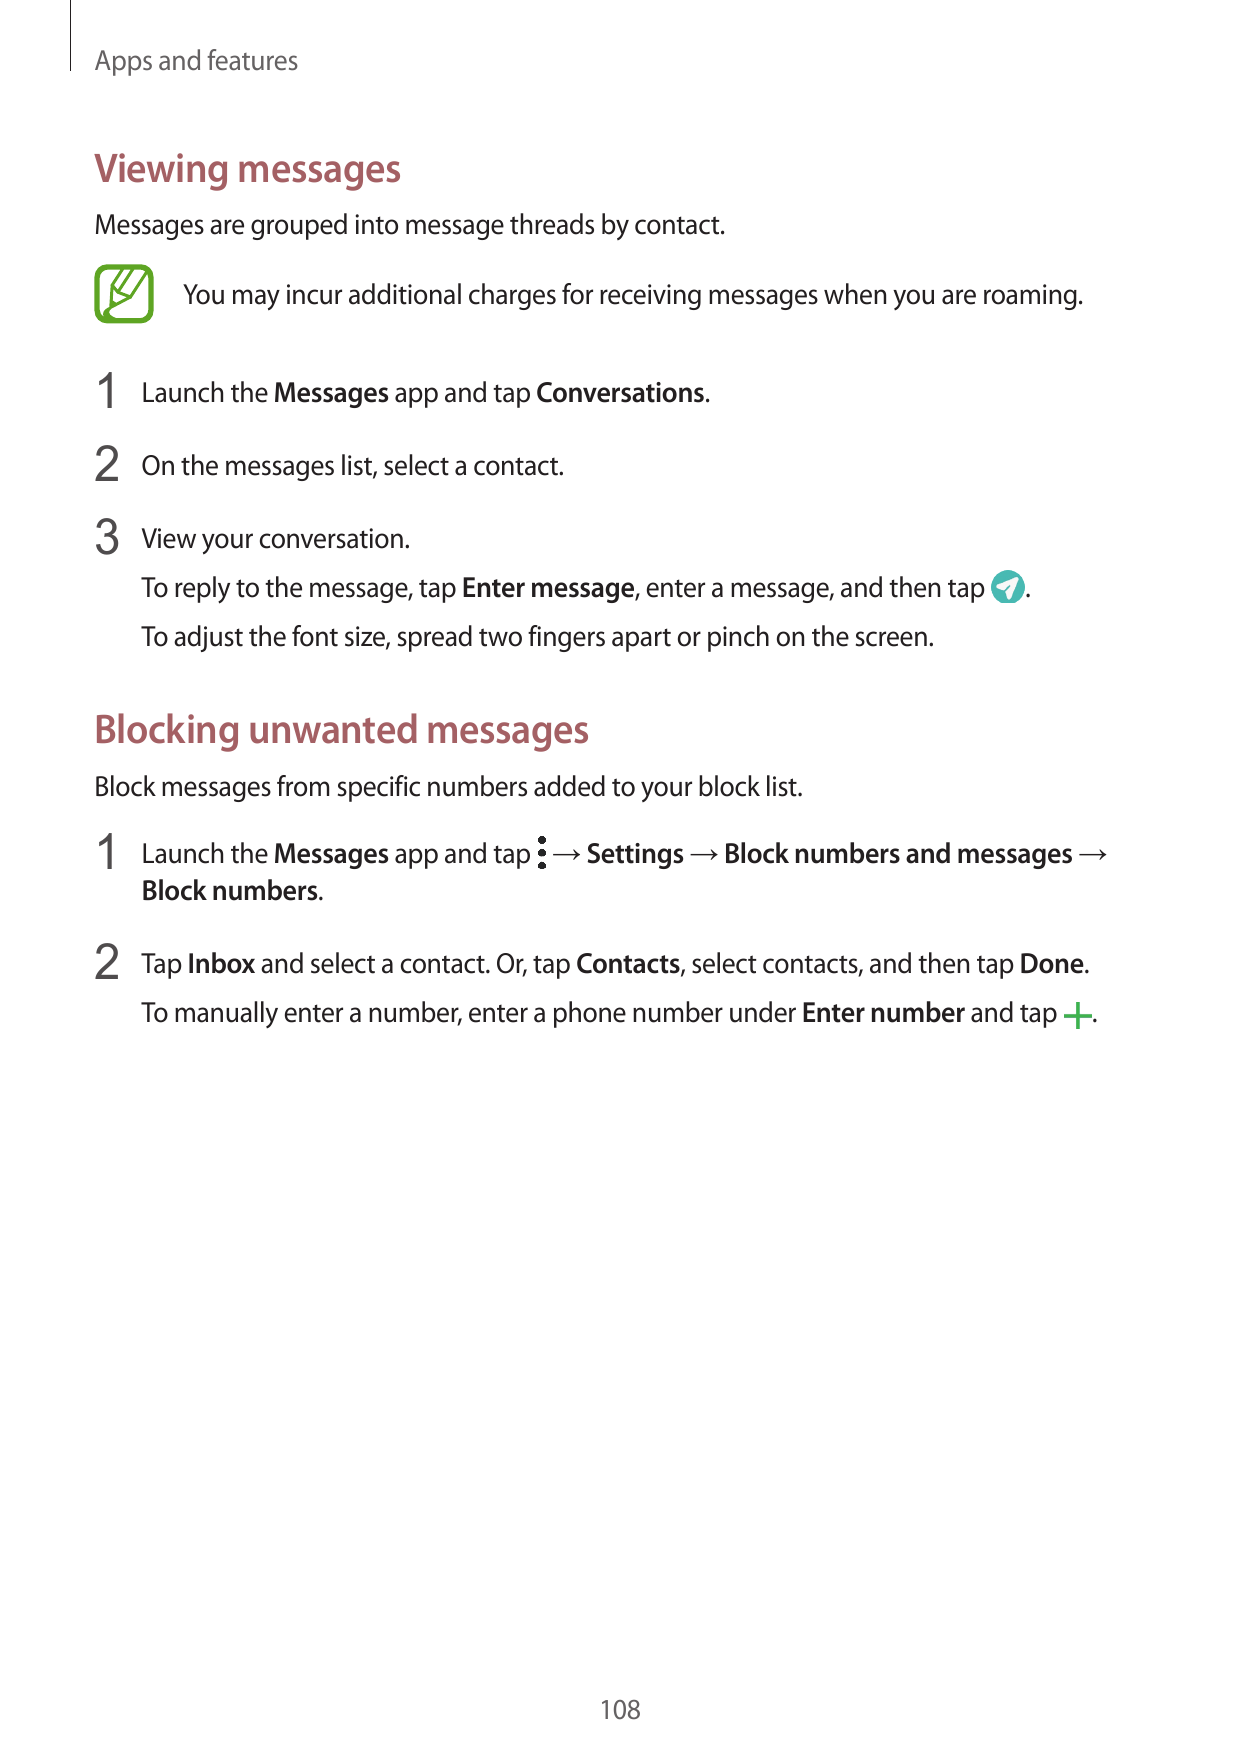 Apps and featuresViewing messagesMessages are grouped into message threads by contact.You may incur additional charges for recei